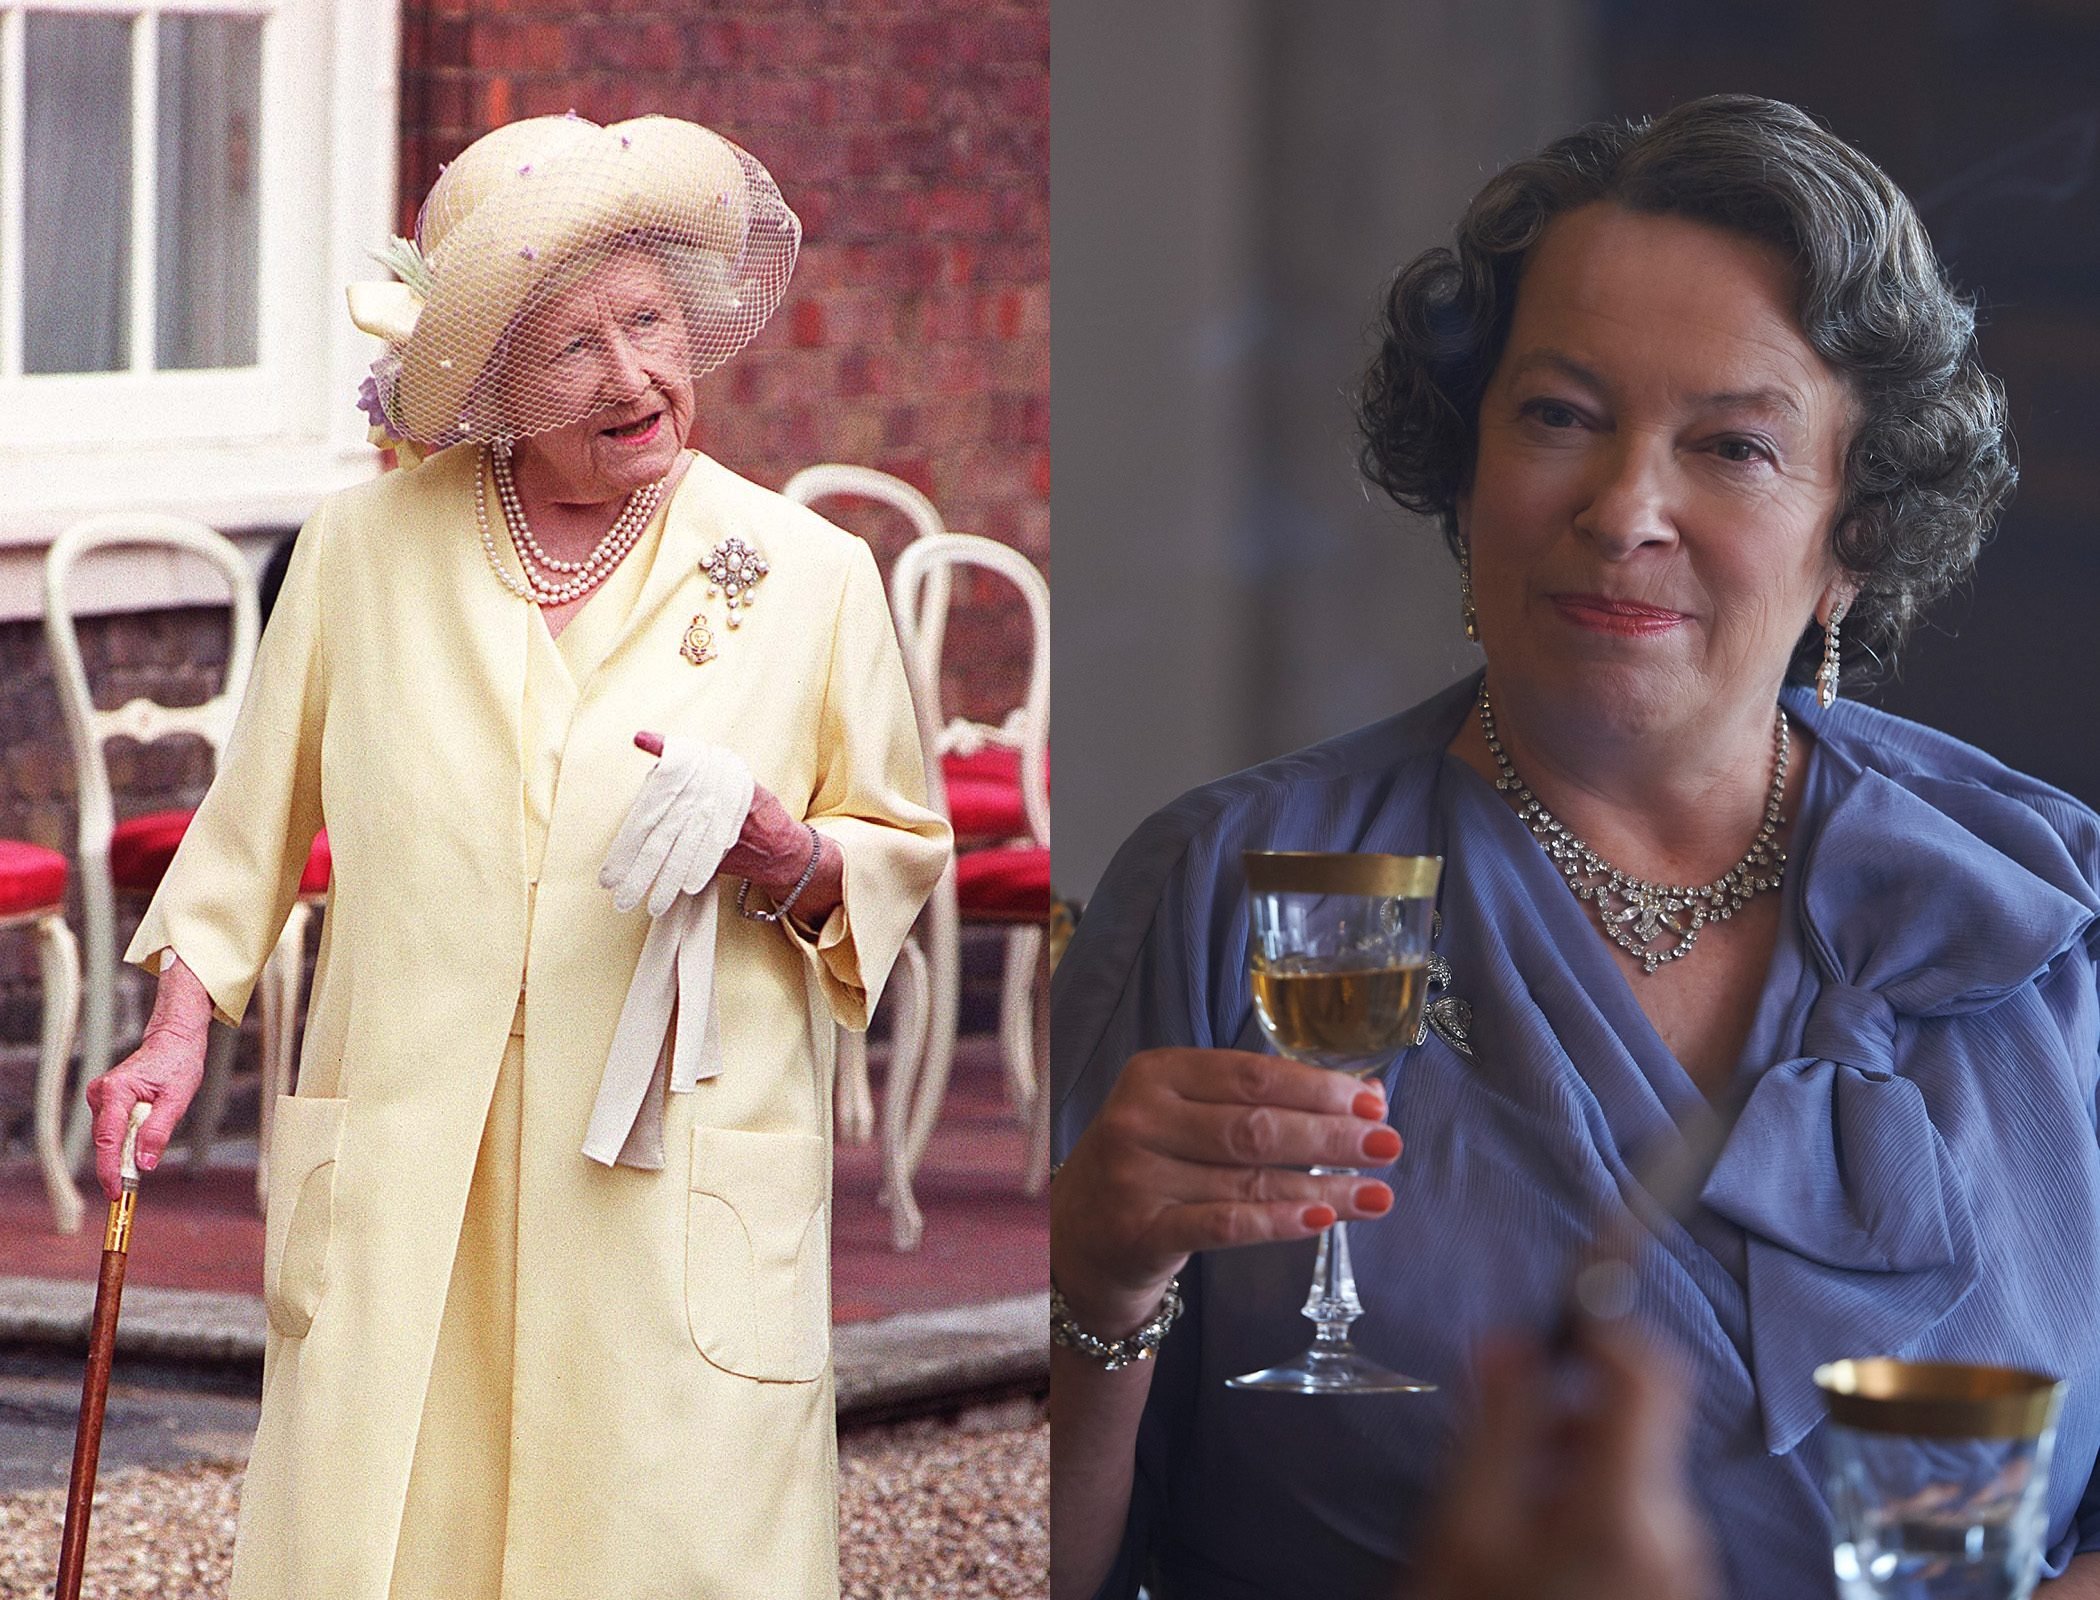 The Queen Mother, as played by Marion Bailey